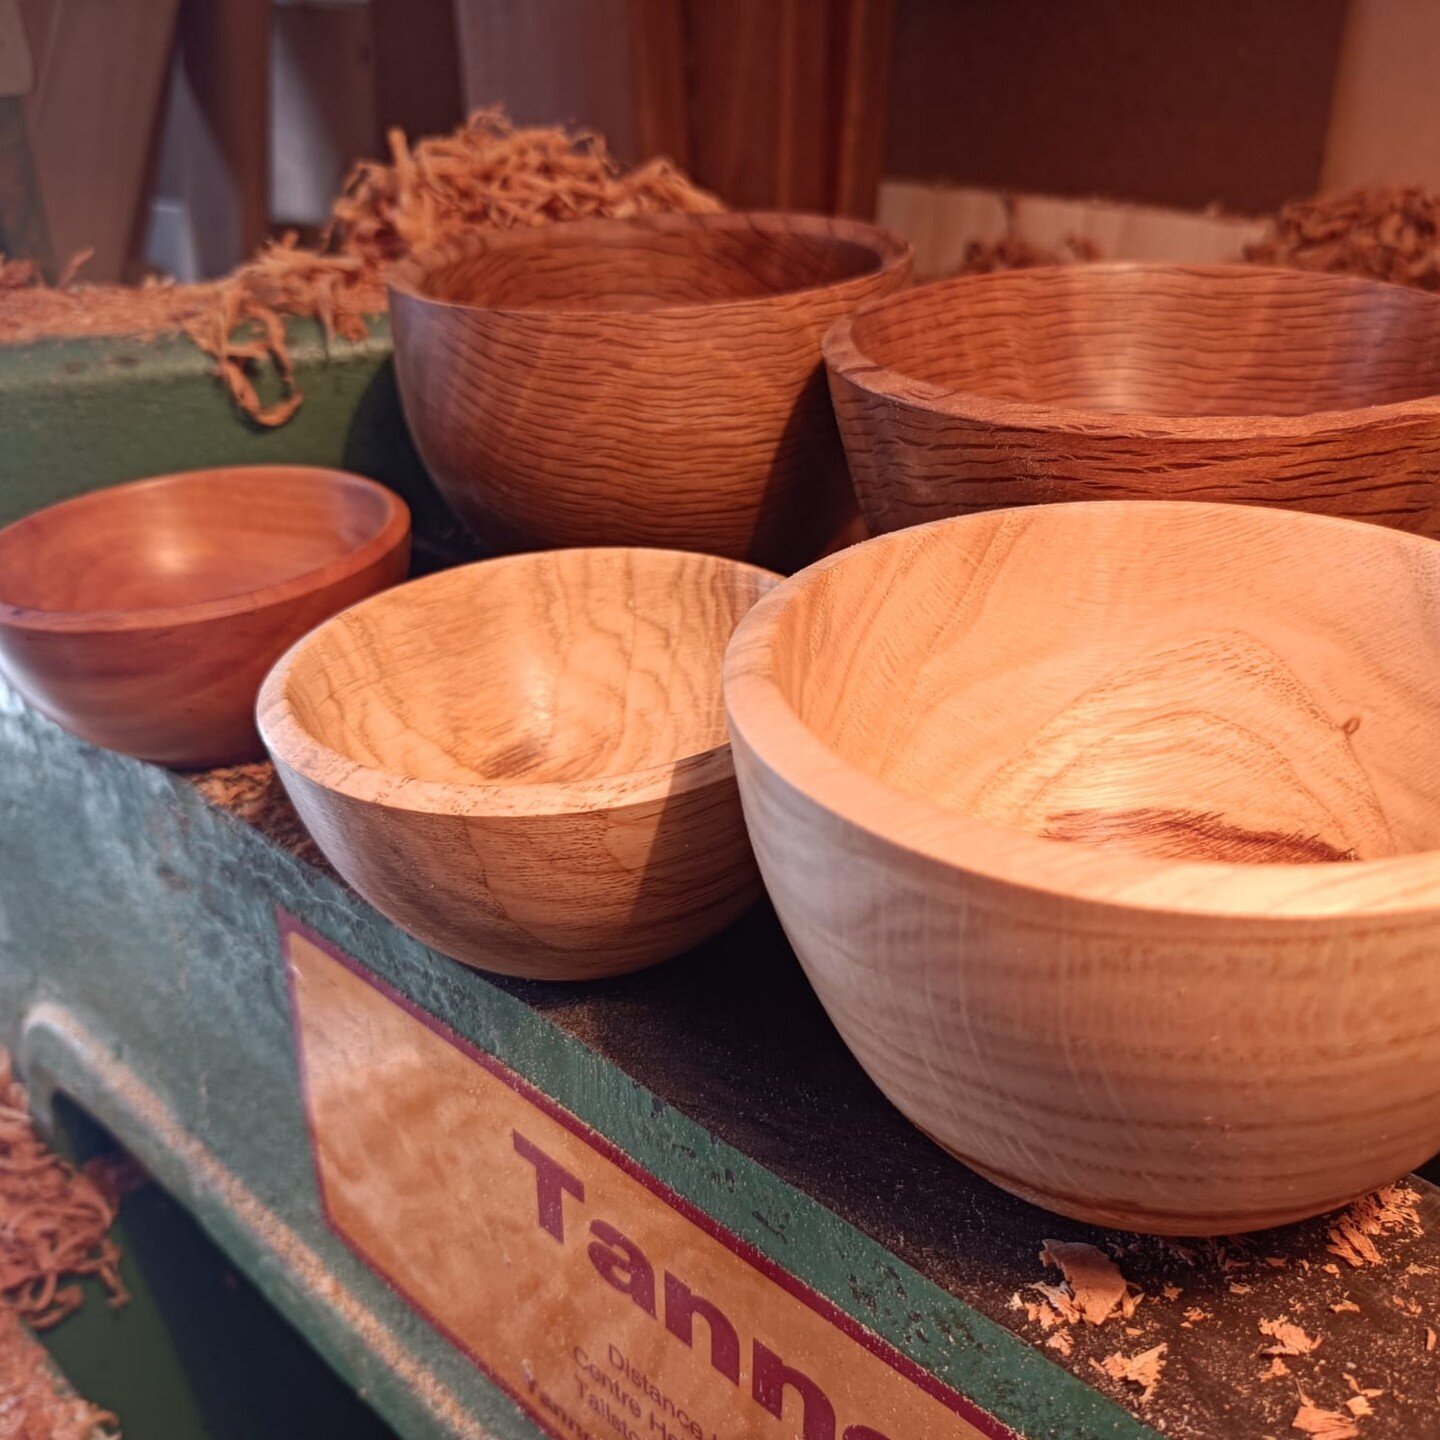 Little bowls, all in reclaimed timber. Holm oak, oak and plum. Made by our very own, Oliver